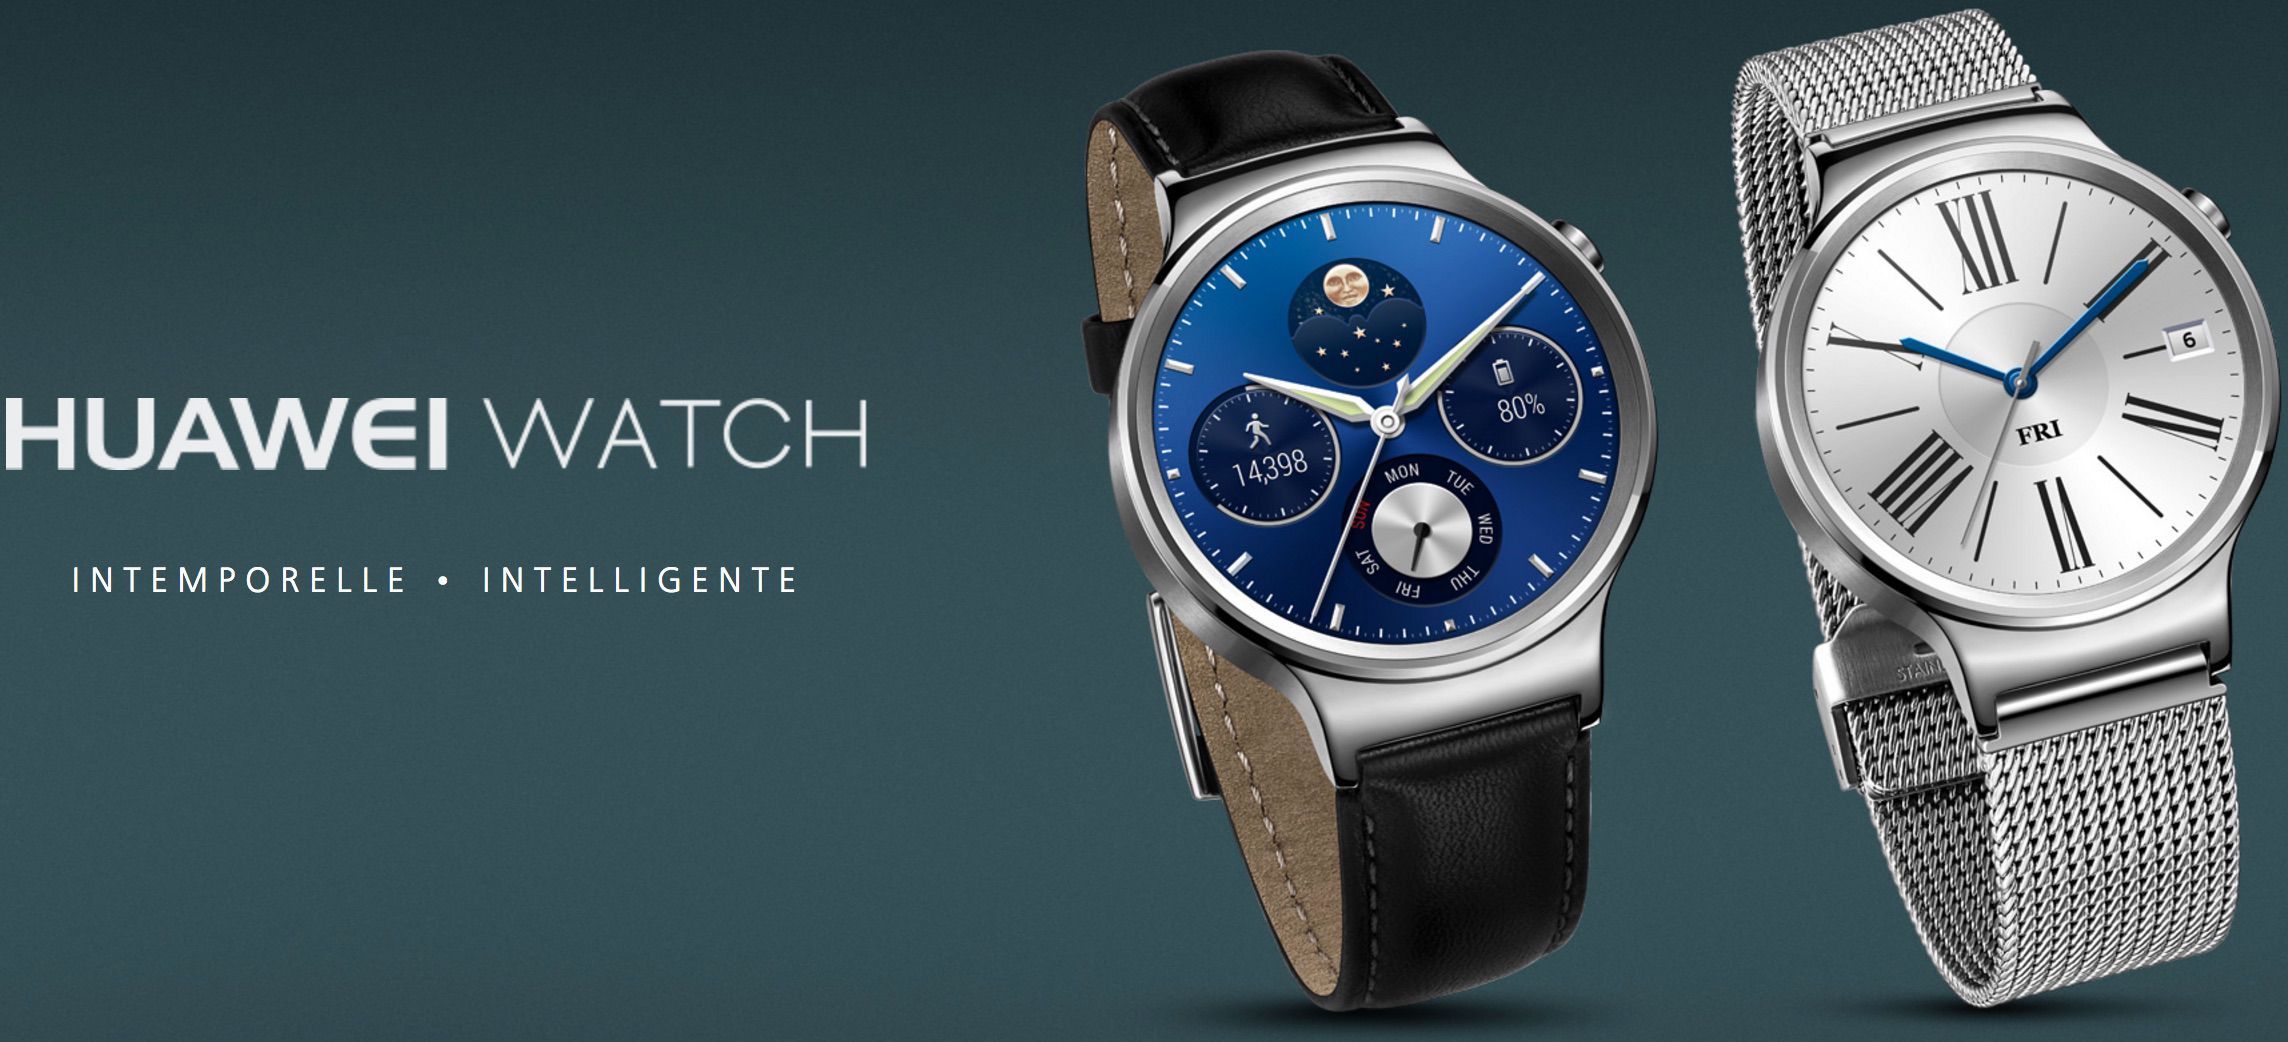 montre connectee HUAWEI Watch montre chinoise